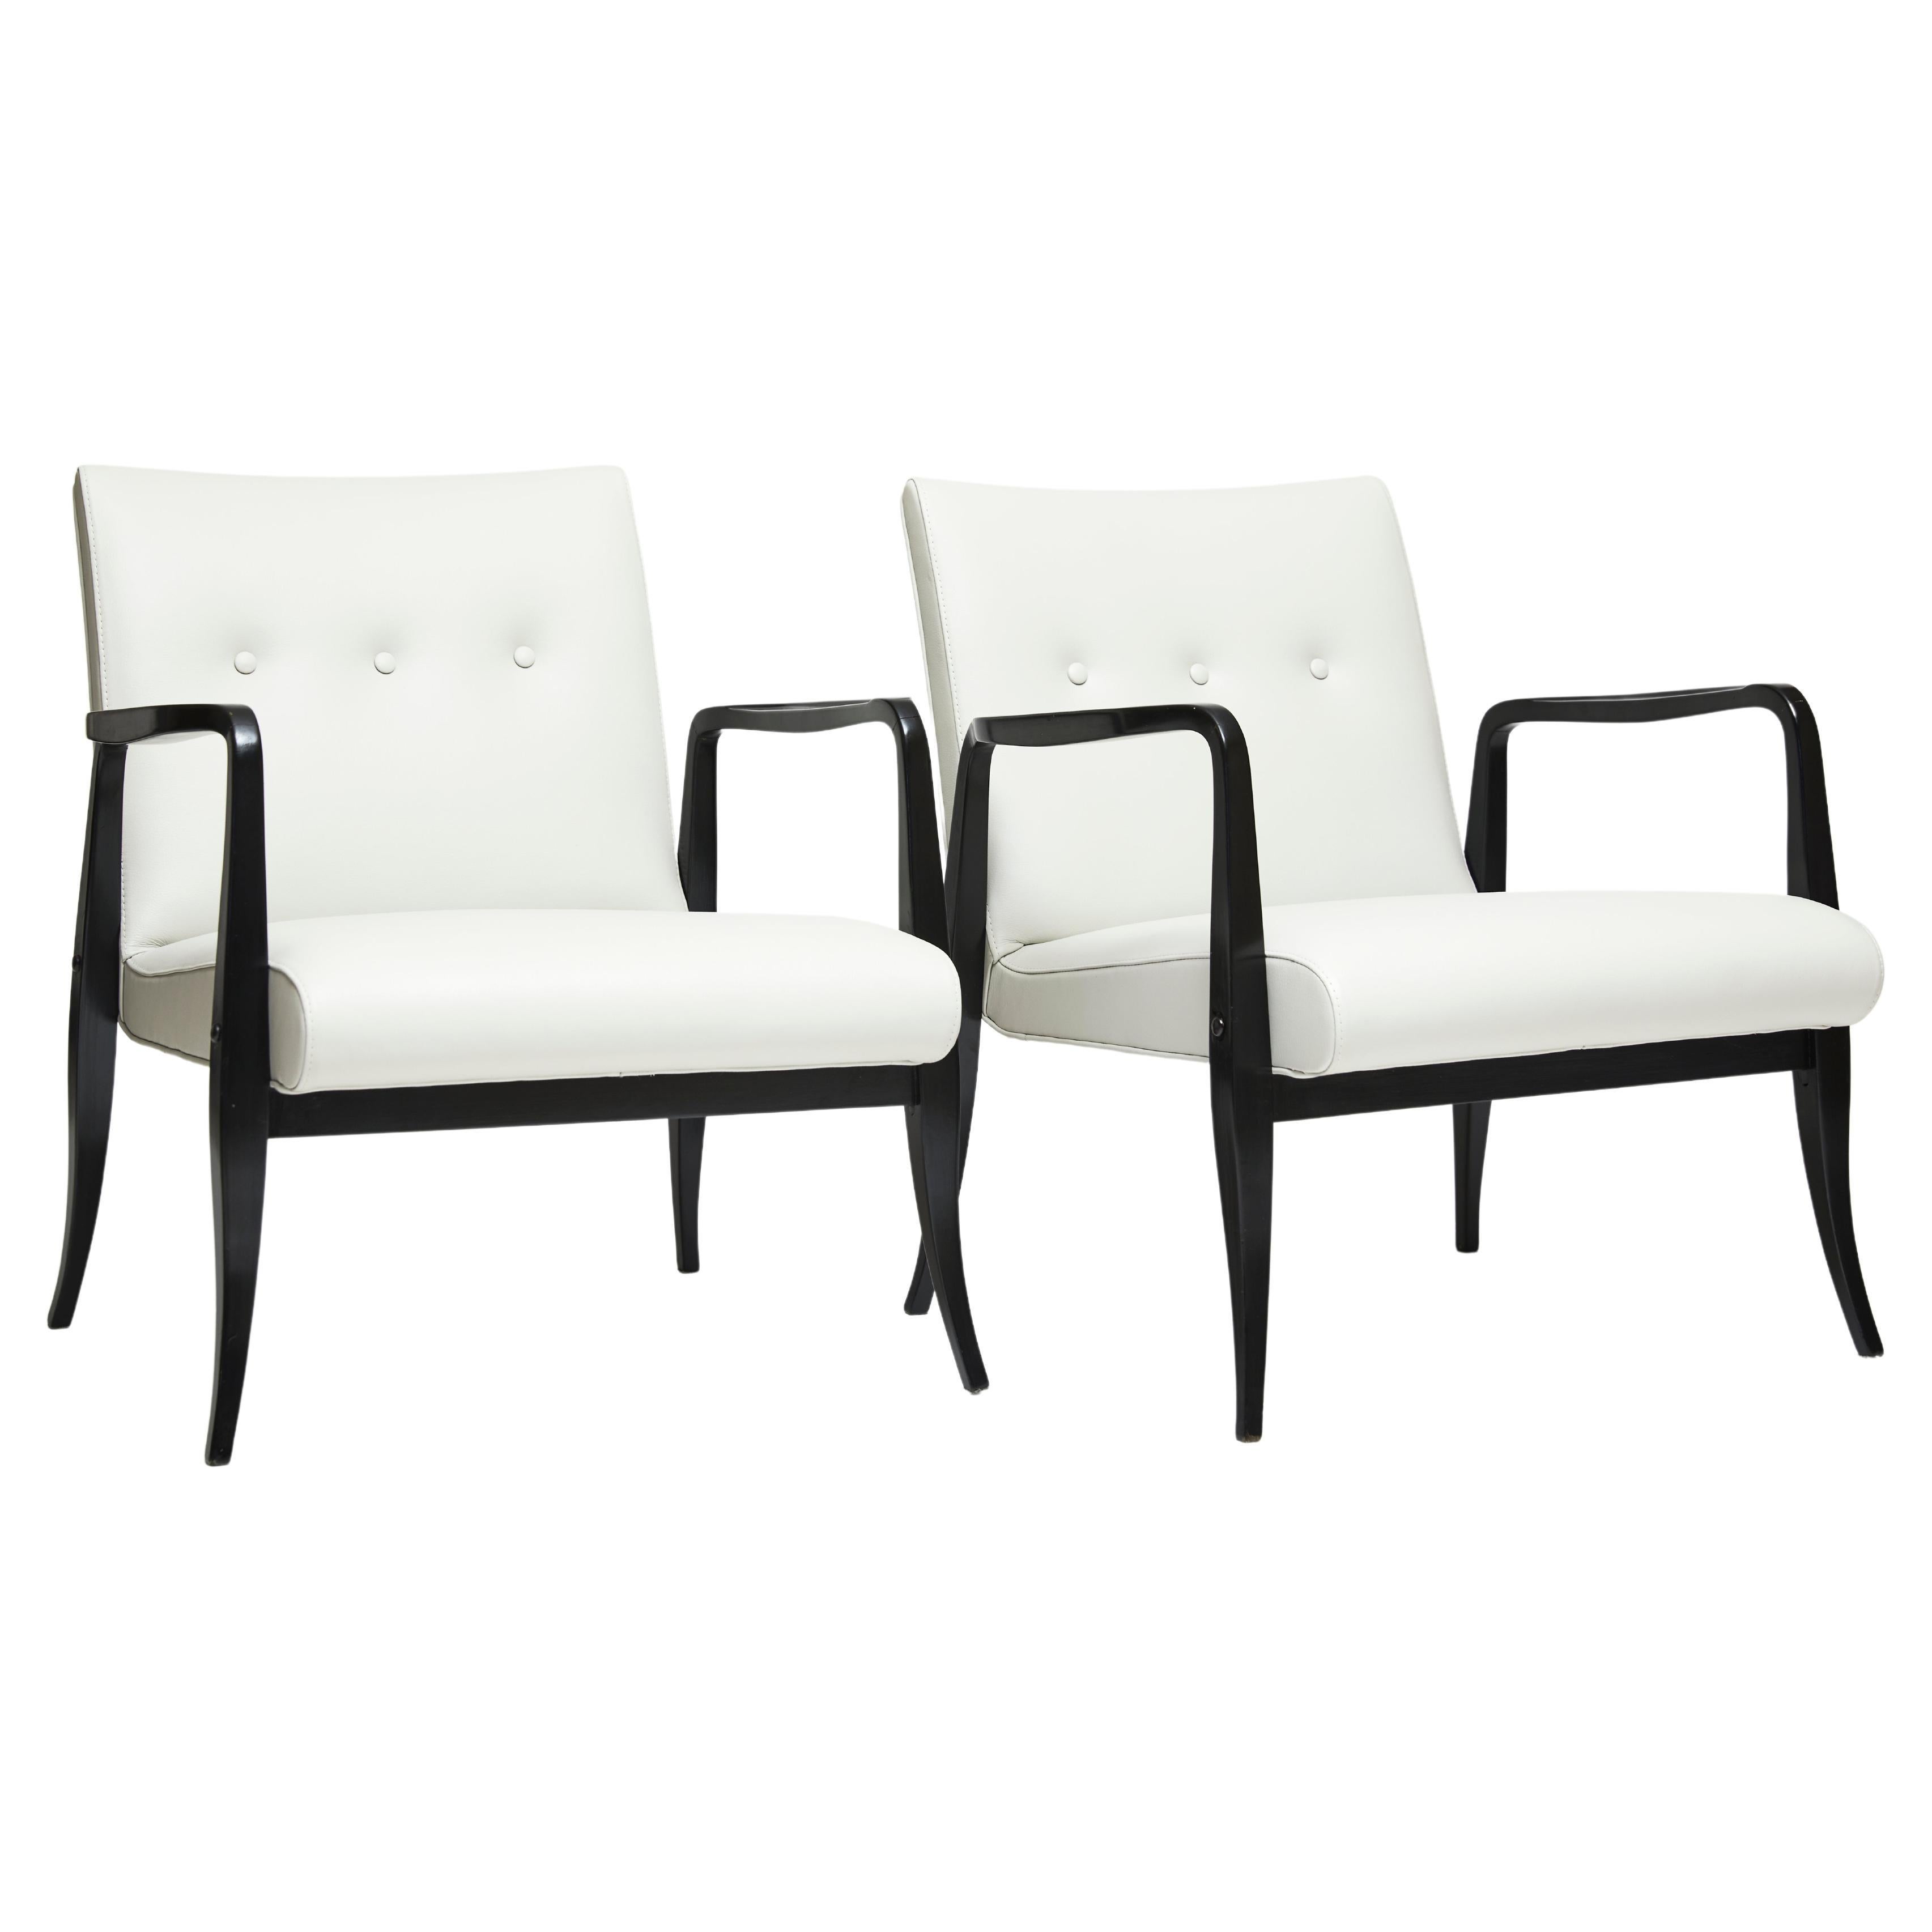 Available now, this beautiful pair of Brazilian Modern armchairs are made of ebonized Pau Marfim hardwood & white leather in buttone style. 

The structure is composed of curved arms & feet, and were designed by Joaquim Tenreiro in the 1940’s. The